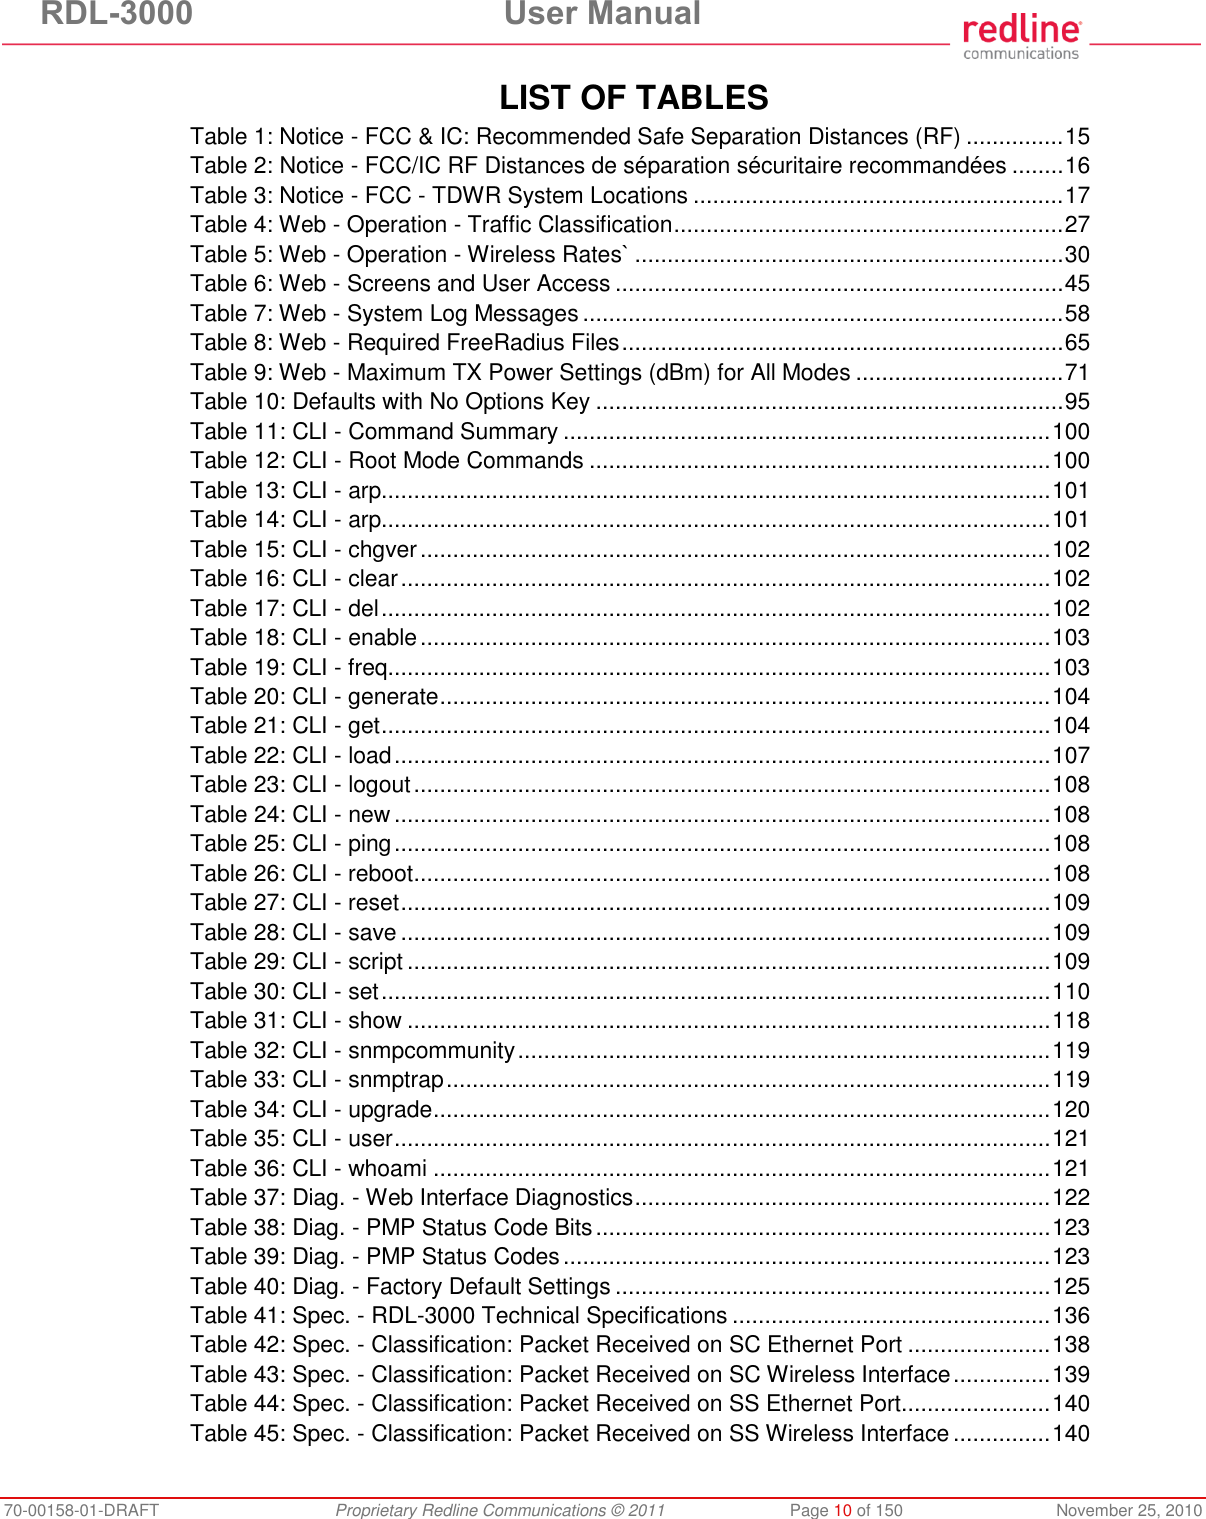 RDL-3000  User Manual 70-00158-01-DRAFT  Proprietary Redline Communications © 2011  Page 10 of 150  November 25, 2010  LIST OF TABLES Table 1: Notice - FCC &amp; IC: Recommended Safe Separation Distances (RF) ............... 15 Table 2: Notice - FCC/IC RF Distances de séparation sécuritaire recommandées ........ 16 Table 3: Notice - FCC - TDWR System Locations ......................................................... 17 Table 4: Web - Operation - Traffic Classification ............................................................ 27 Table 5: Web - Operation - Wireless Rates` .................................................................. 30 Table 6: Web - Screens and User Access ..................................................................... 45 Table 7: Web - System Log Messages .......................................................................... 58 Table 8: Web - Required FreeRadius Files .................................................................... 65 Table 9: Web - Maximum TX Power Settings (dBm) for All Modes ................................ 71 Table 10: Defaults with No Options Key ........................................................................ 95 Table 11: CLI - Command Summary ........................................................................... 100 Table 12: CLI - Root Mode Commands ....................................................................... 100 Table 13: CLI - arp....................................................................................................... 101 Table 14: CLI - arp....................................................................................................... 101 Table 15: CLI - chgver ................................................................................................. 102 Table 16: CLI - clear .................................................................................................... 102 Table 17: CLI - del ....................................................................................................... 102 Table 18: CLI - enable ................................................................................................. 103 Table 19: CLI - freq...................................................................................................... 103 Table 20: CLI - generate .............................................................................................. 104 Table 21: CLI - get ....................................................................................................... 104 Table 22: CLI - load ..................................................................................................... 107 Table 23: CLI - logout .................................................................................................. 108 Table 24: CLI - new ..................................................................................................... 108 Table 25: CLI - ping ..................................................................................................... 108 Table 26: CLI - reboot .................................................................................................. 108 Table 27: CLI - reset .................................................................................................... 109 Table 28: CLI - save .................................................................................................... 109 Table 29: CLI - script ................................................................................................... 109 Table 30: CLI - set ....................................................................................................... 110 Table 31: CLI - show ................................................................................................... 118 Table 32: CLI - snmpcommunity .................................................................................. 119 Table 33: CLI - snmptrap ............................................................................................. 119 Table 34: CLI - upgrade ............................................................................................... 120 Table 35: CLI - user ..................................................................................................... 121 Table 36: CLI - whoami ............................................................................................... 121 Table 37: Diag. - Web Interface Diagnostics ................................................................ 122 Table 38: Diag. - PMP Status Code Bits ...................................................................... 123 Table 39: Diag. - PMP Status Codes ........................................................................... 123 Table 40: Diag. - Factory Default Settings ................................................................... 125 Table 41: Spec. - RDL-3000 Technical Specifications ................................................. 136 Table 42: Spec. - Classification: Packet Received on SC Ethernet Port ...................... 138 Table 43: Spec. - Classification: Packet Received on SC Wireless Interface ............... 139 Table 44: Spec. - Classification: Packet Received on SS Ethernet Port ....................... 140 Table 45: Spec. - Classification: Packet Received on SS Wireless Interface ............... 140 